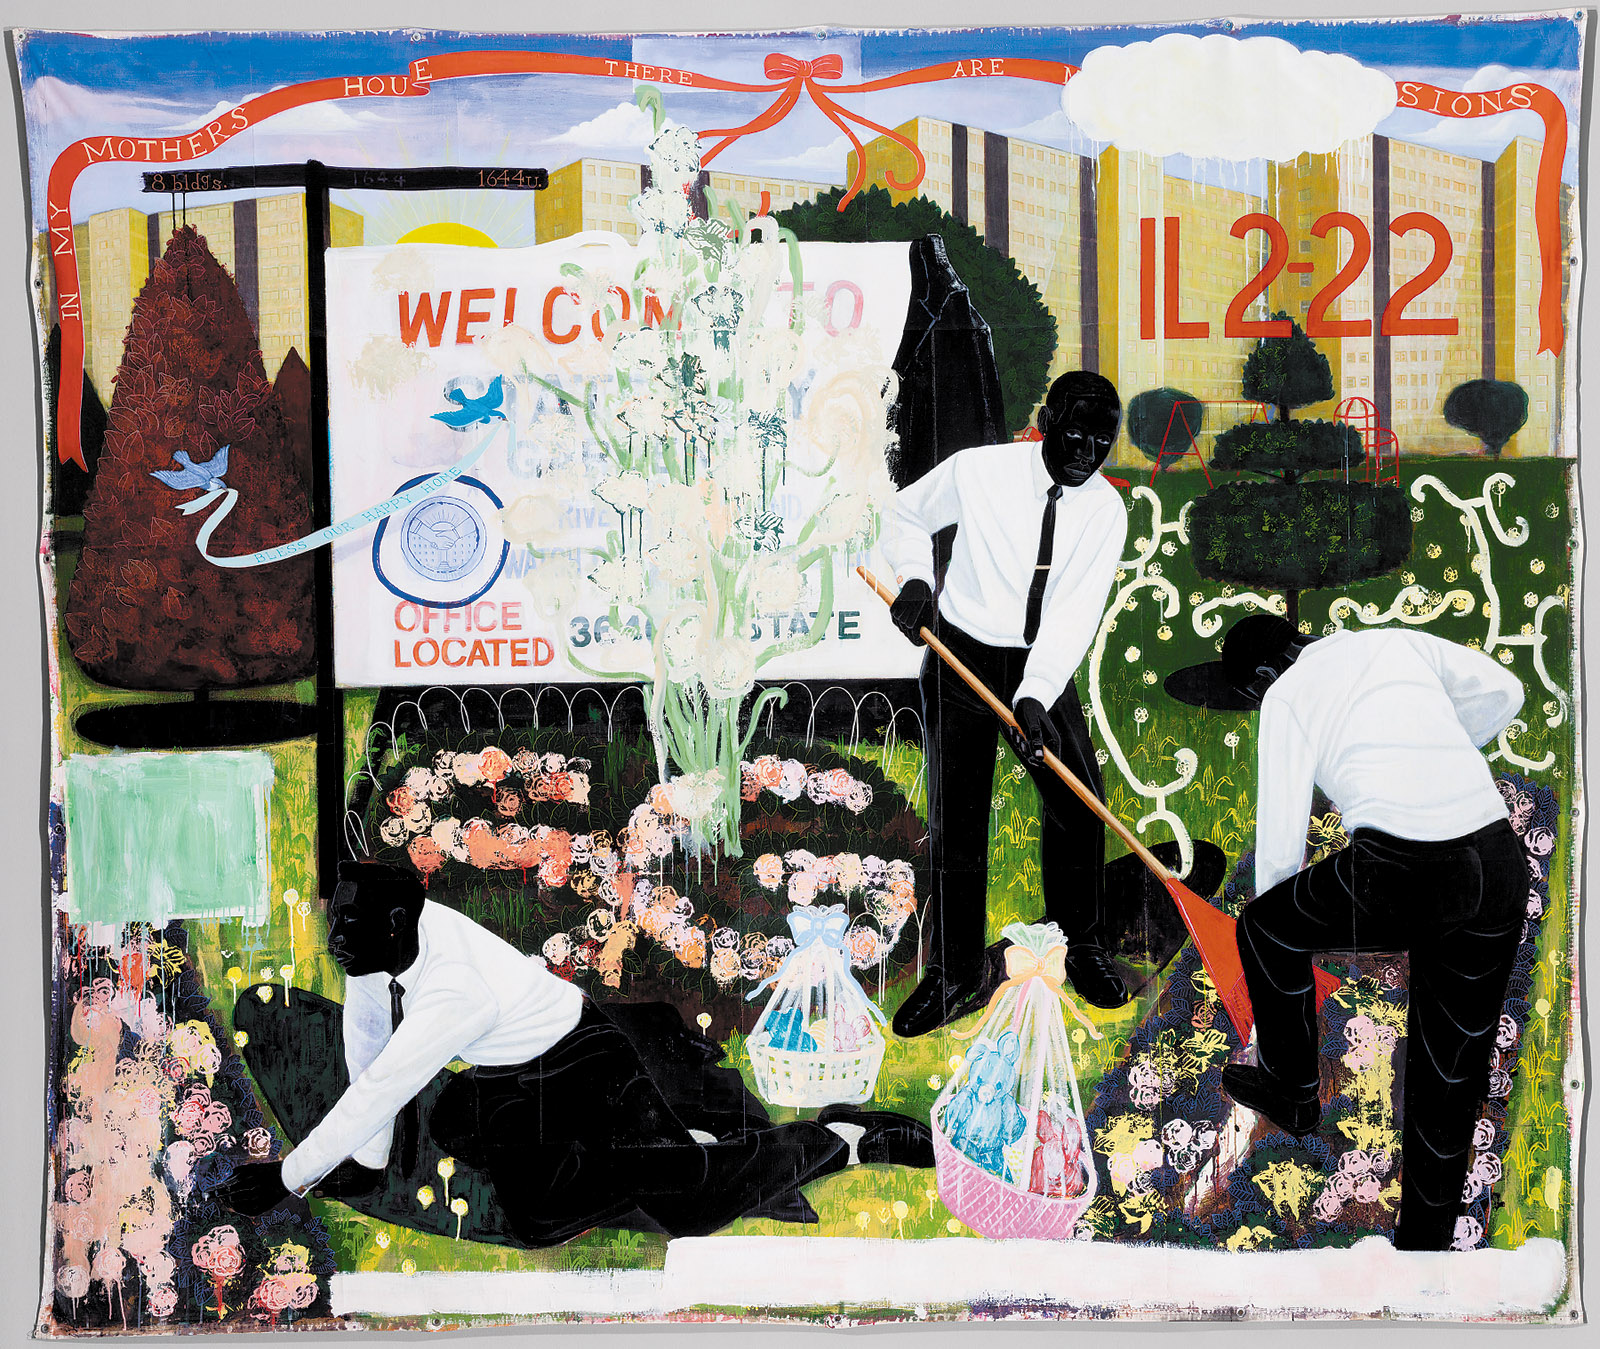 Kerry James Marshall: Many Mansions, 114 x 135 inches, 1994